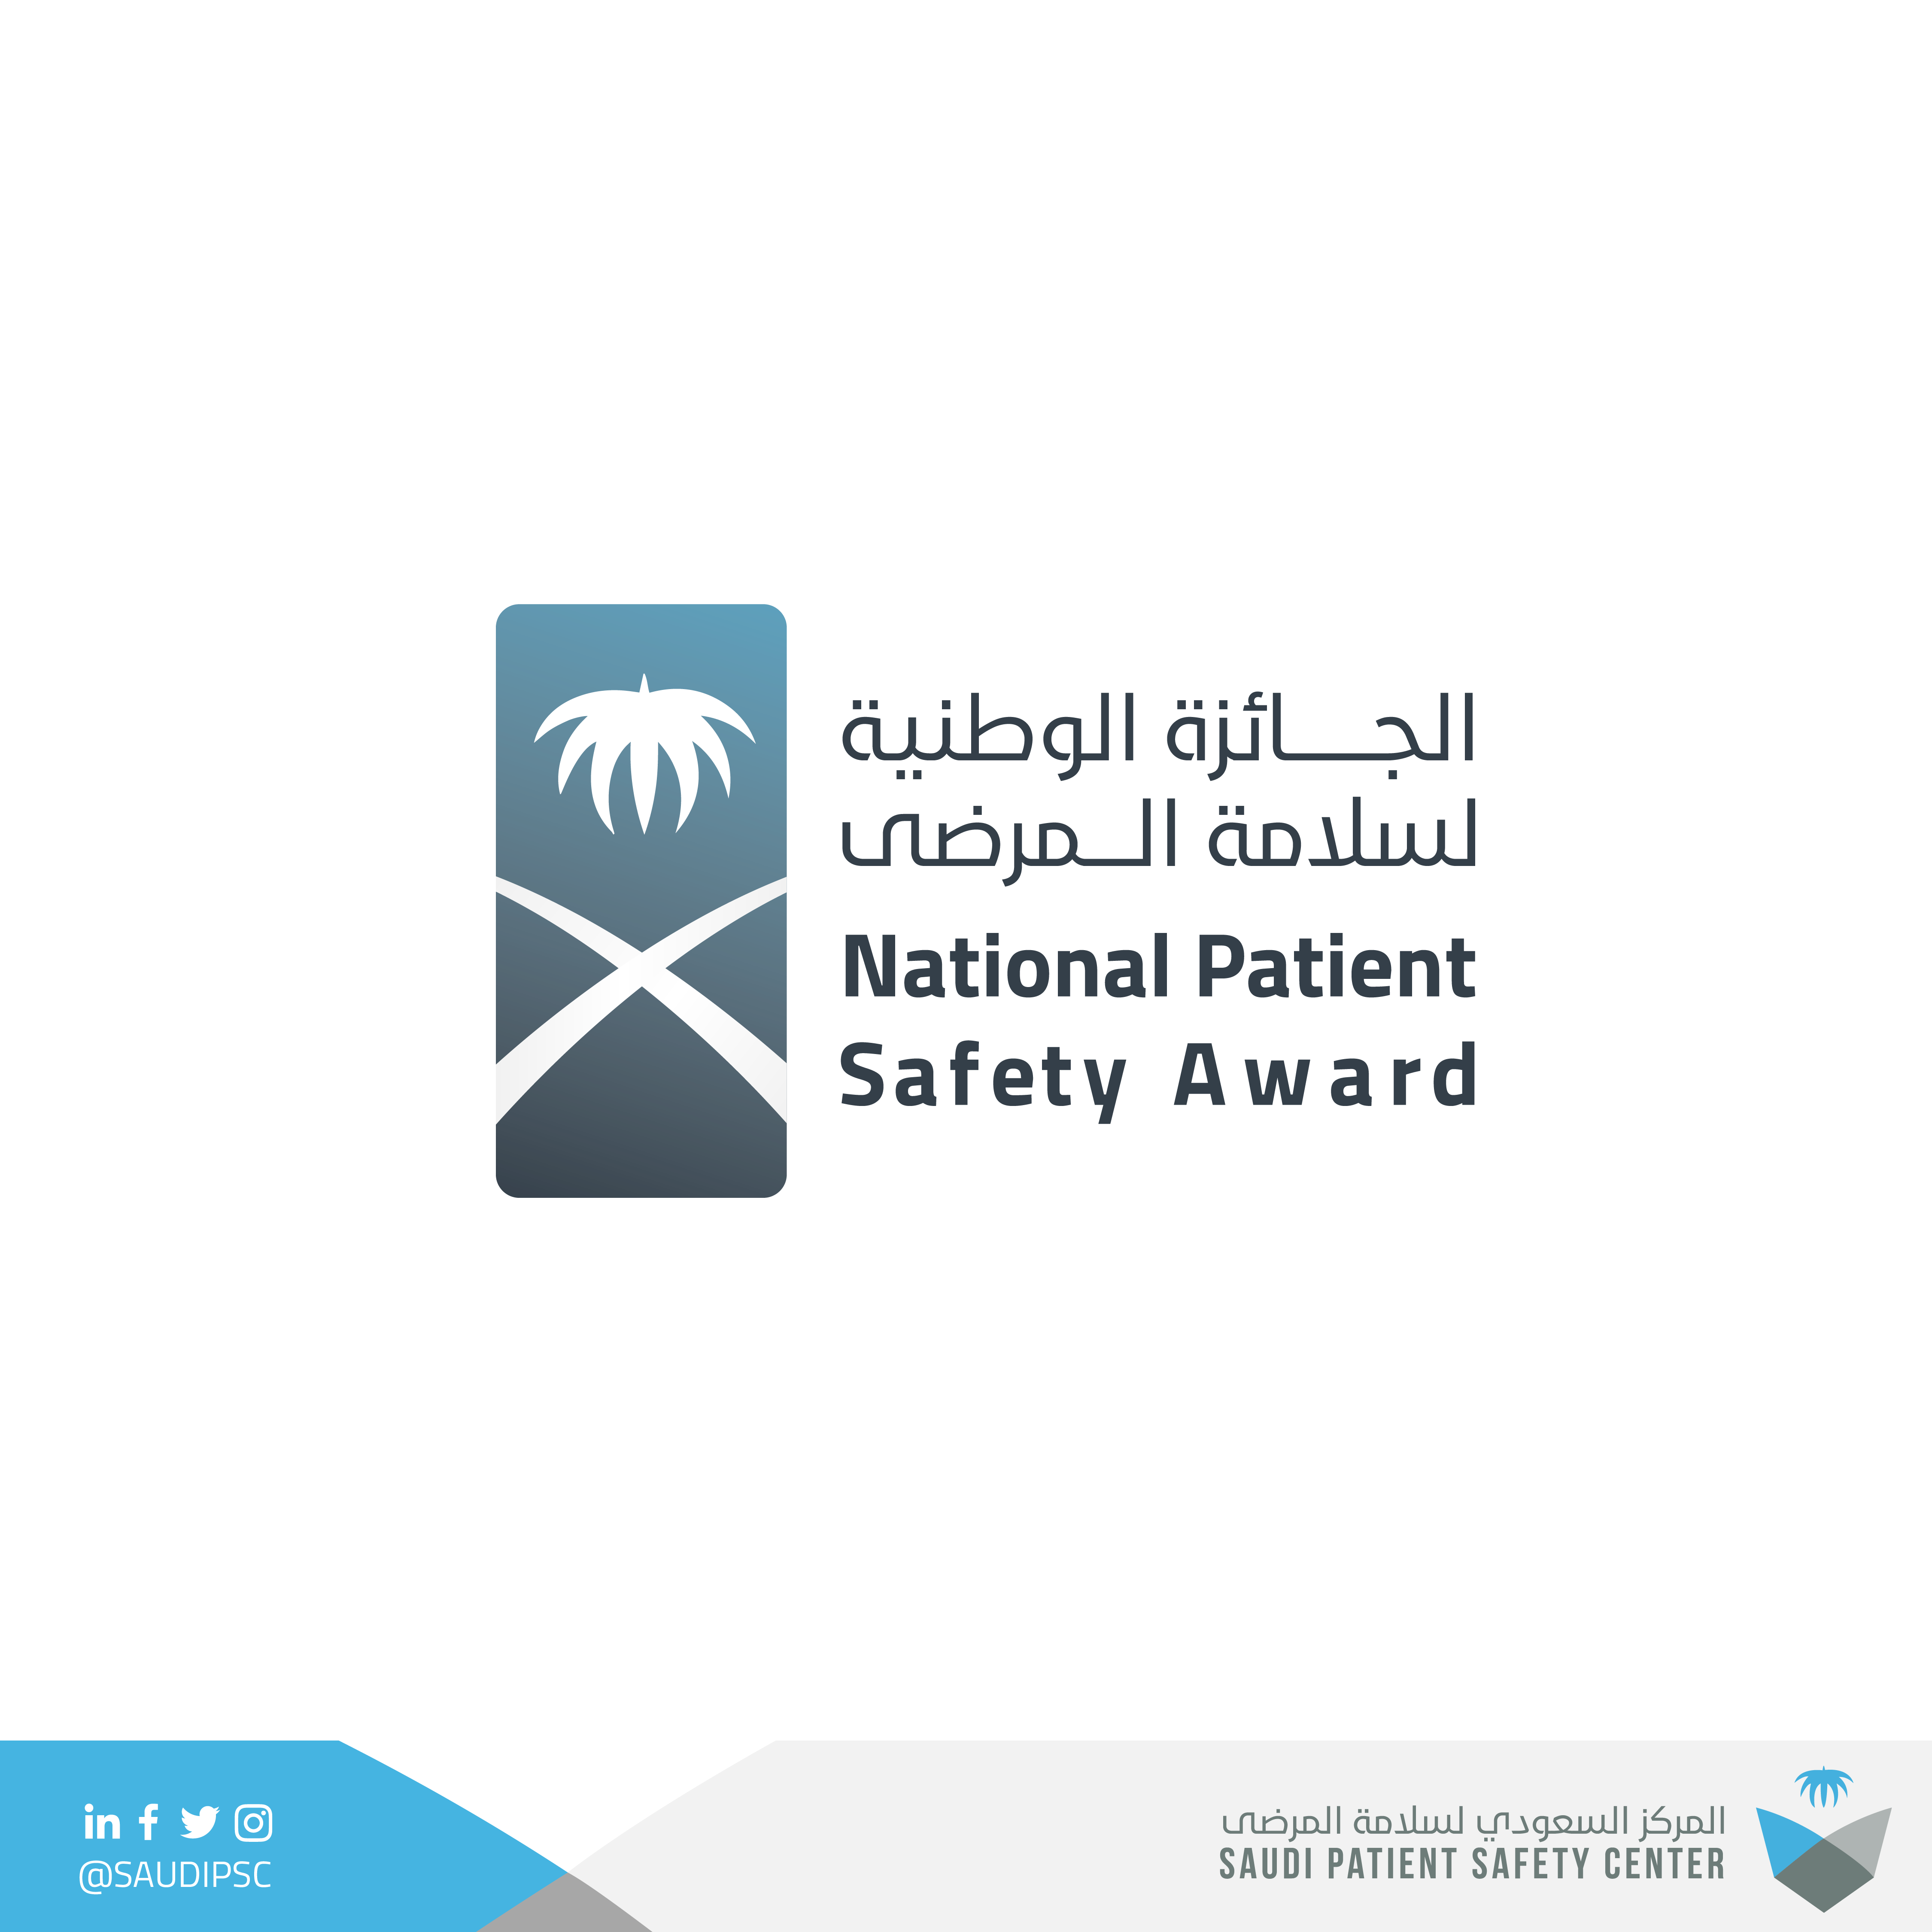 The Saudi Patient Safety Center announces the submission opening for the National Patient Safety Award in its 5th edition, 2022